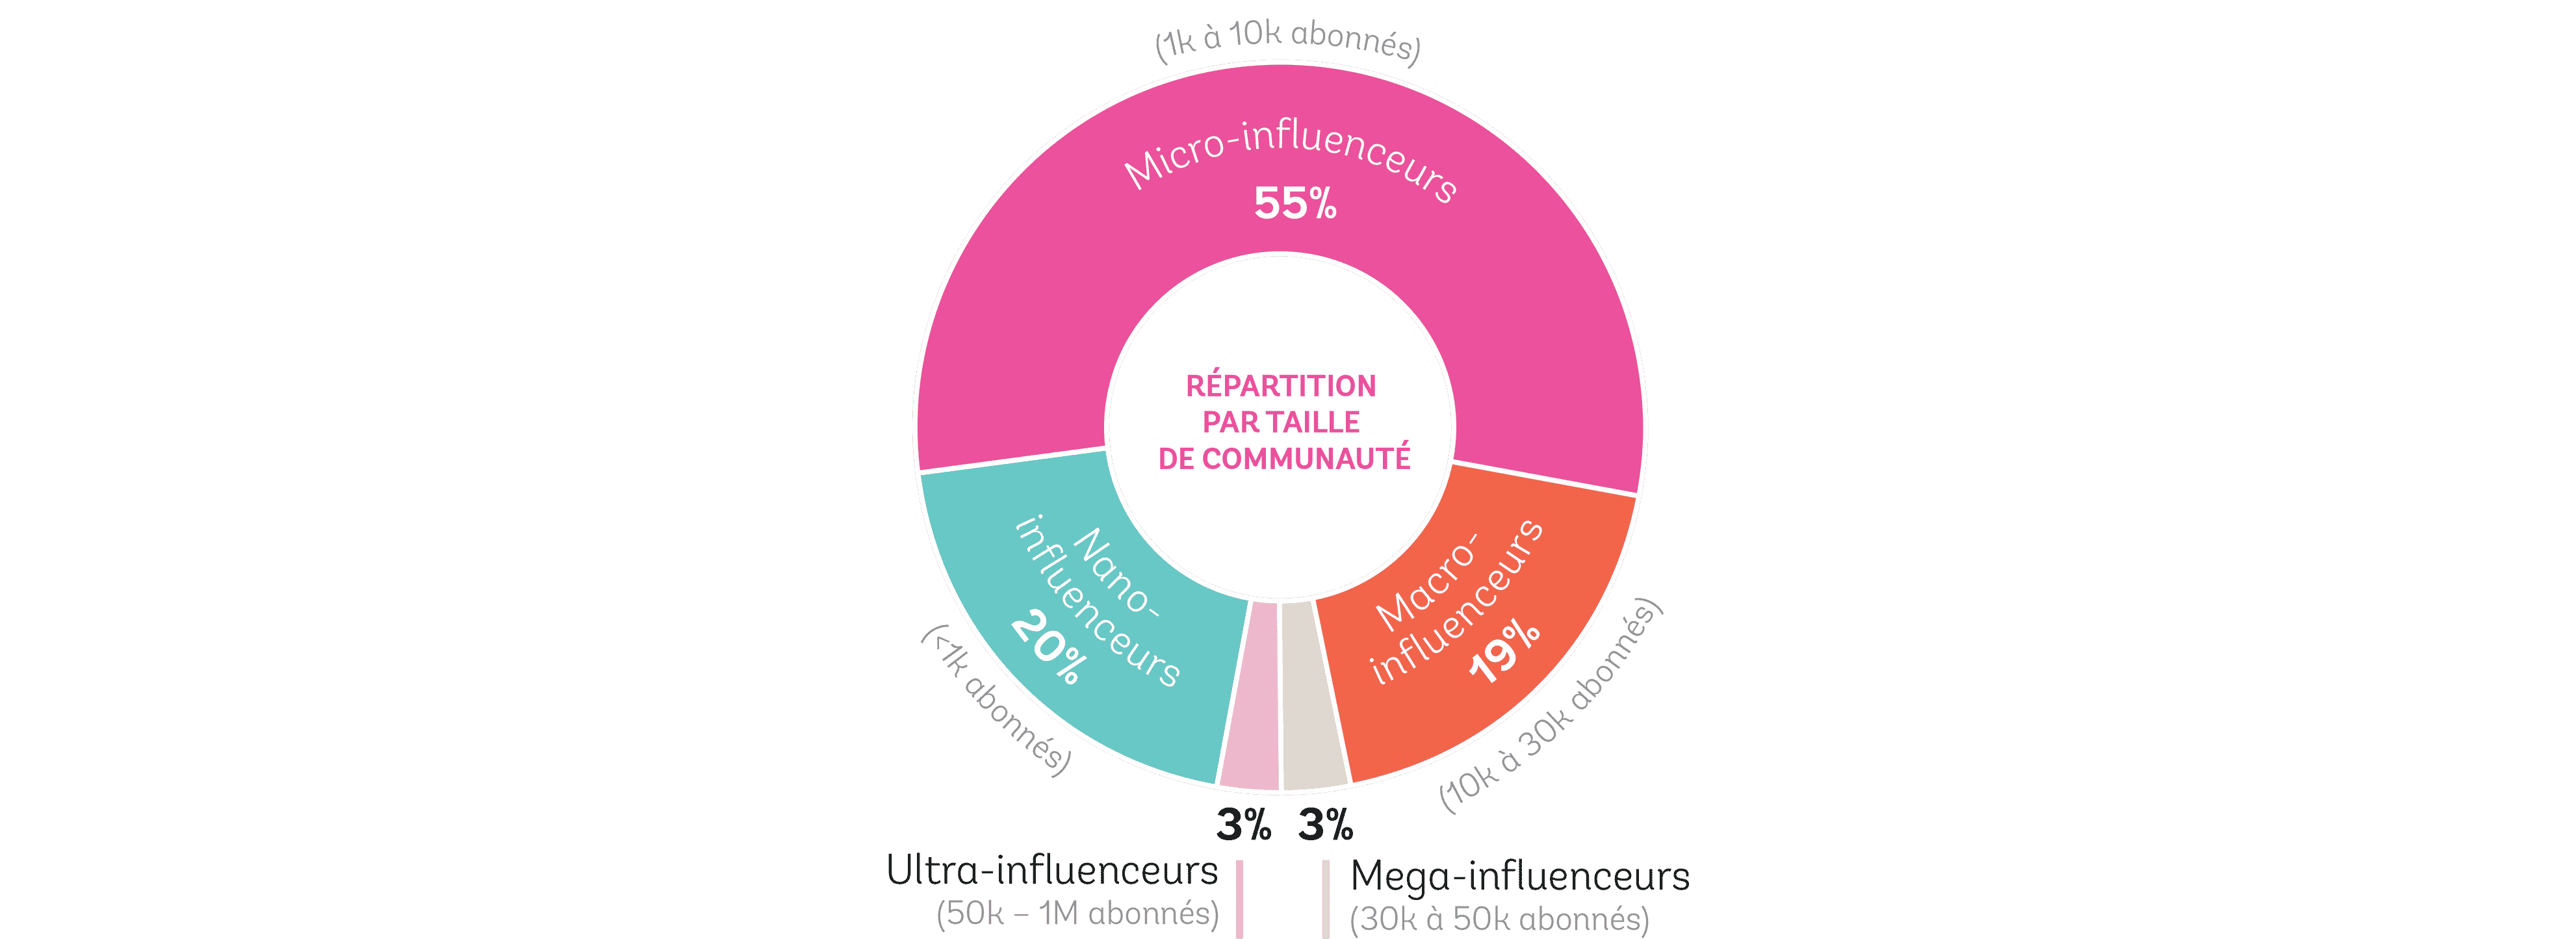 repartition-taille-communaute-influenceurs-mamans